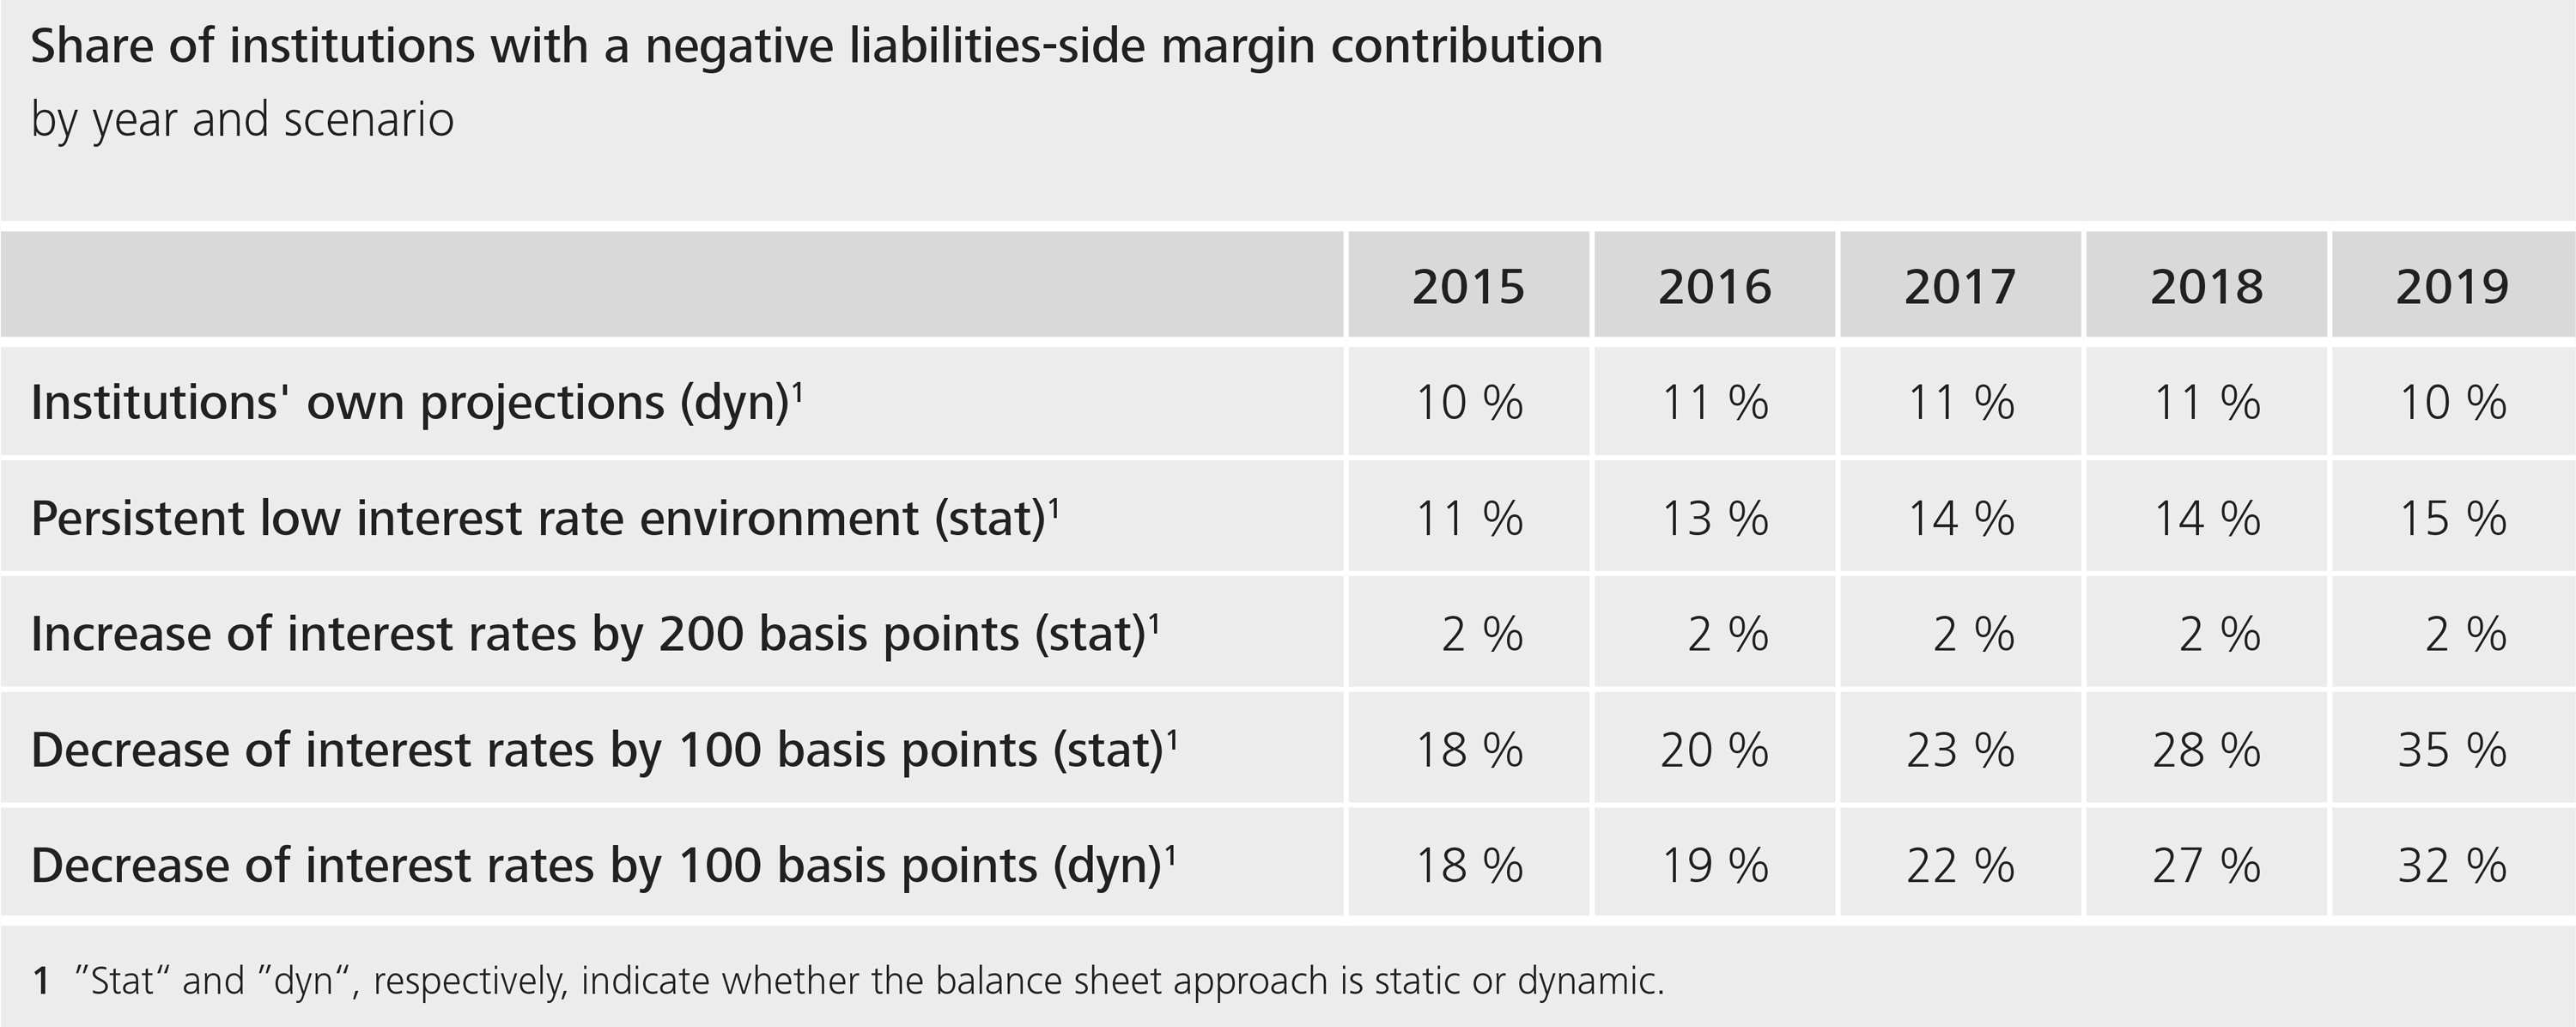 Table 1: Share of institutions with a negative liabilities-side margin contribution